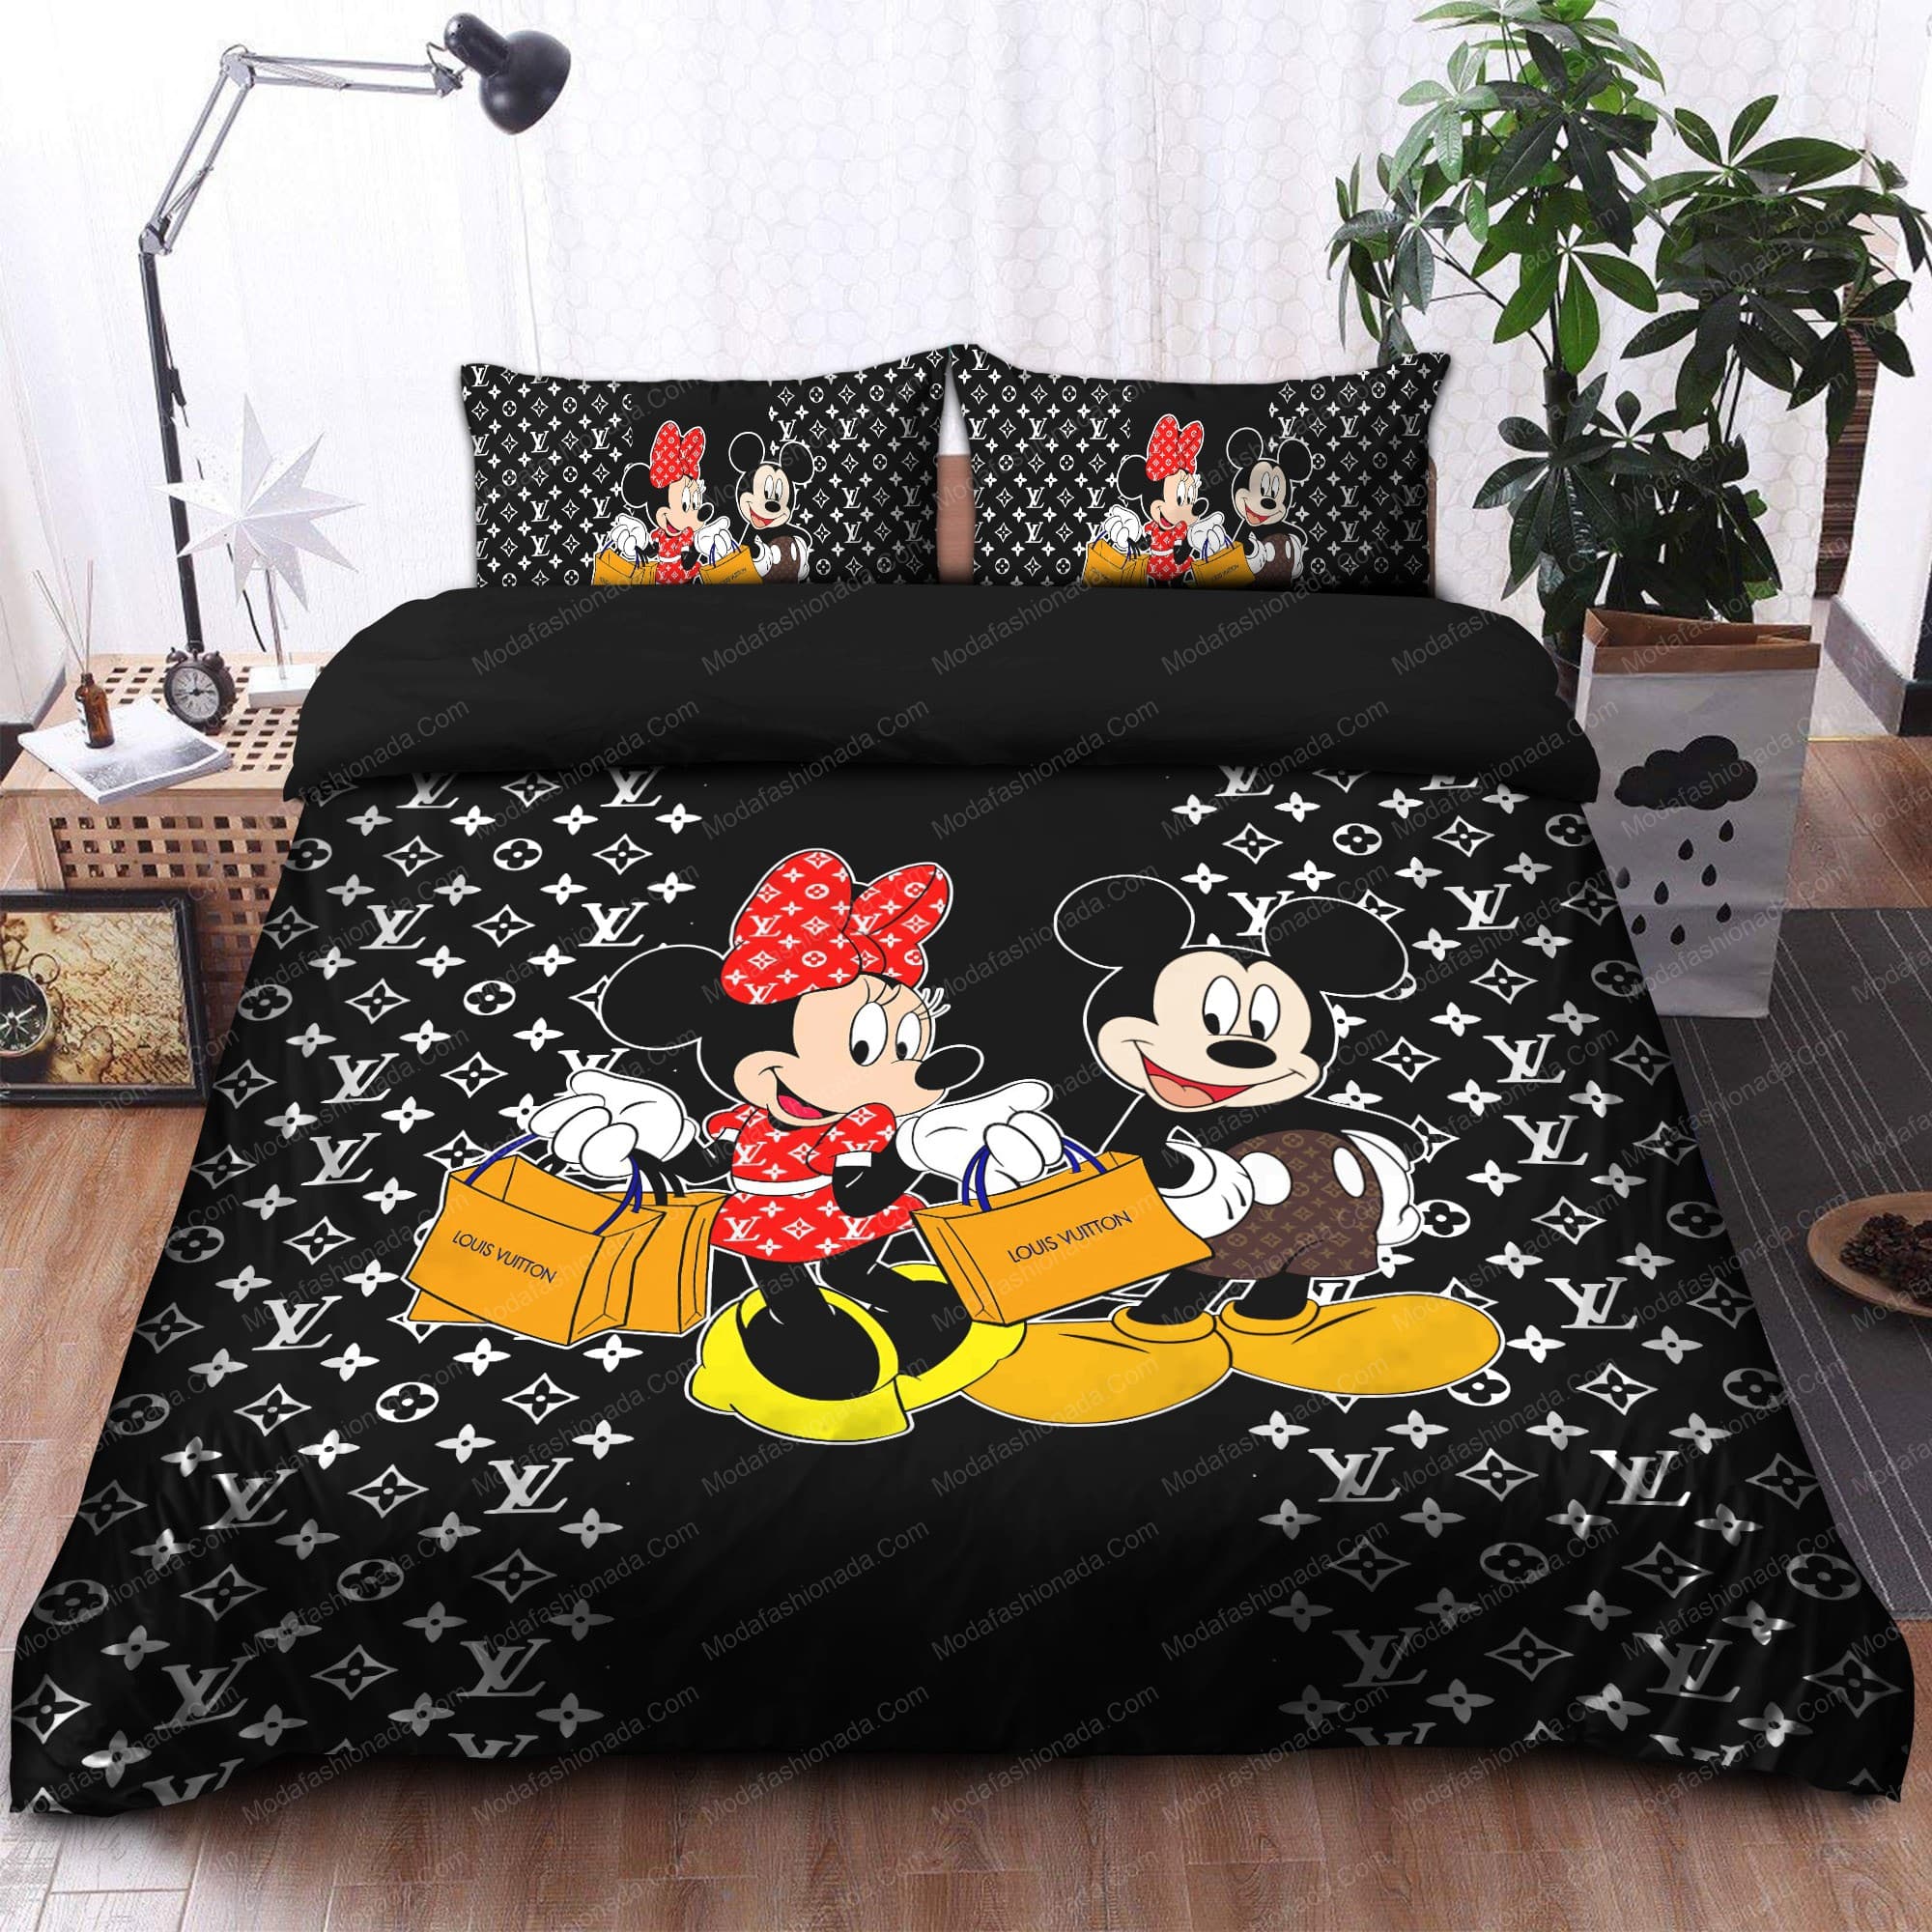 Assorted Minnie Mouse Bedding Sets 